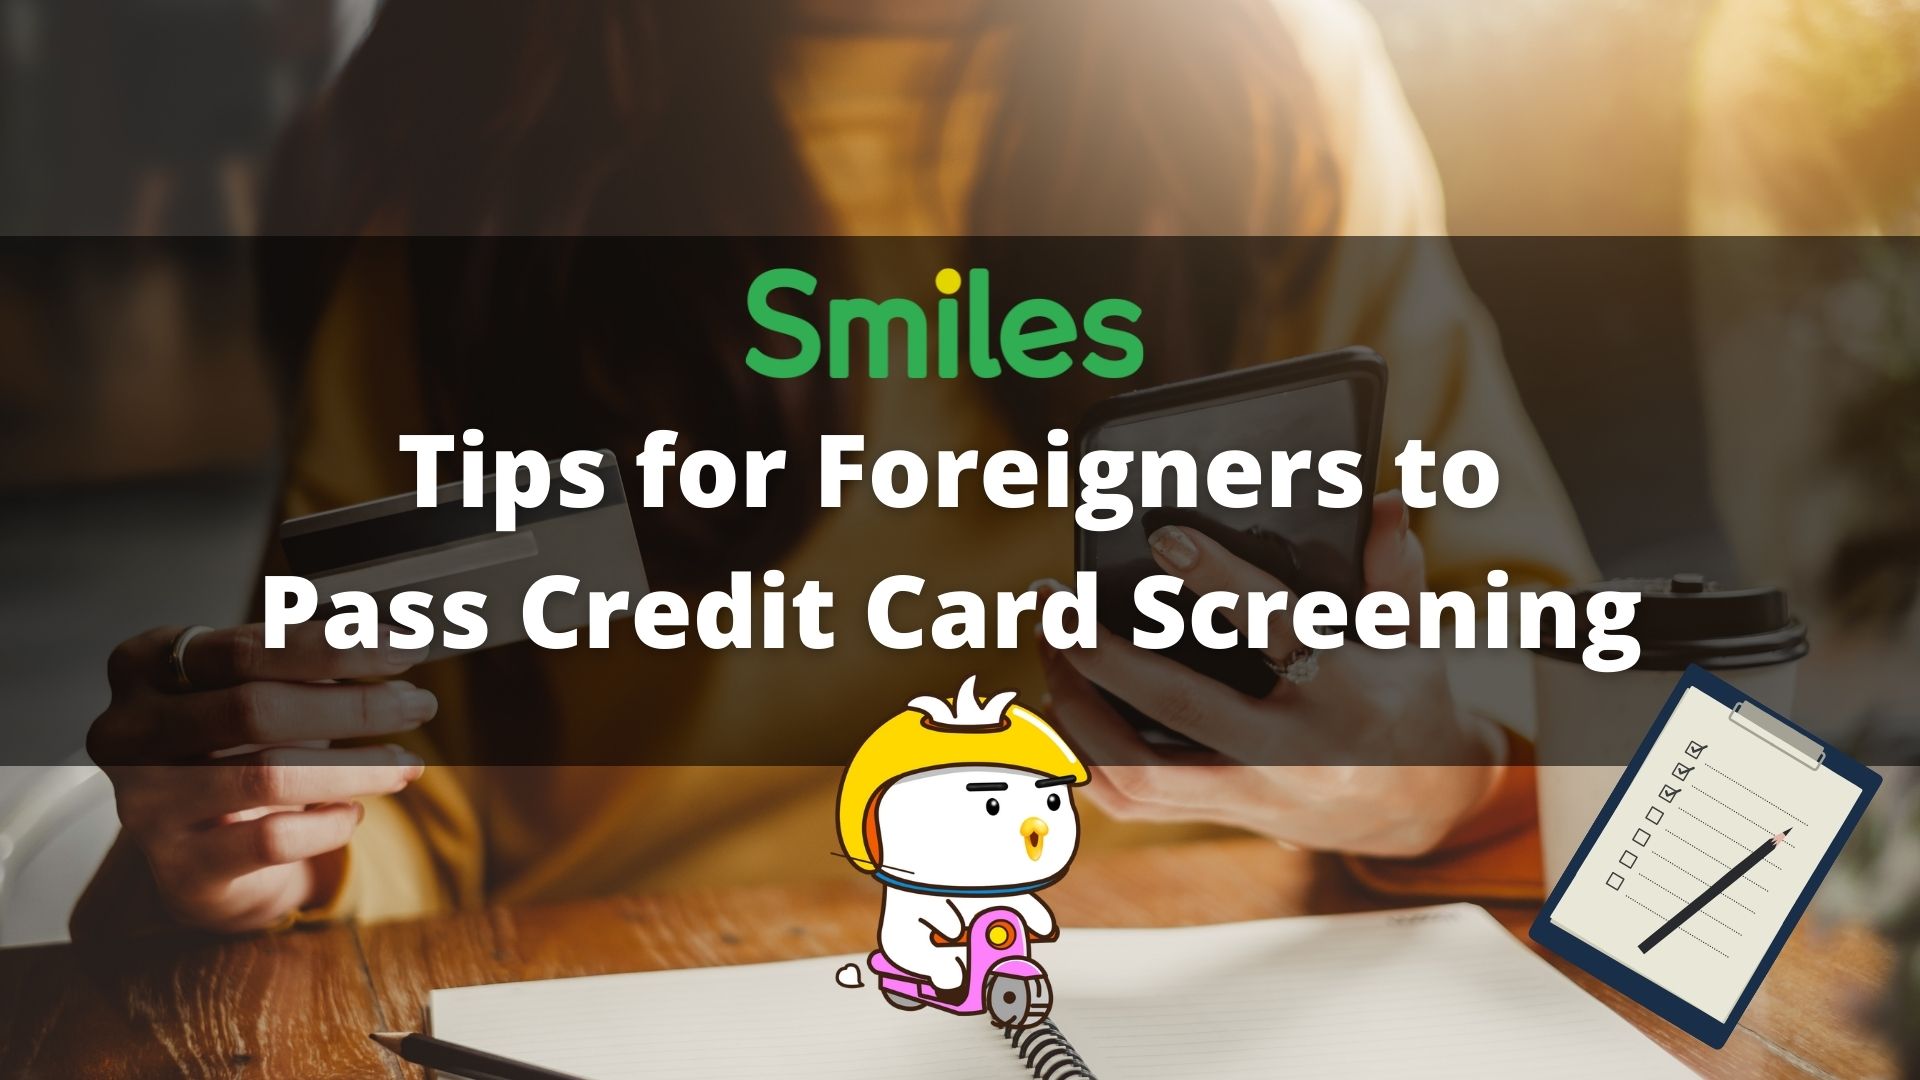 Tips for foreigners to pass credit card screening